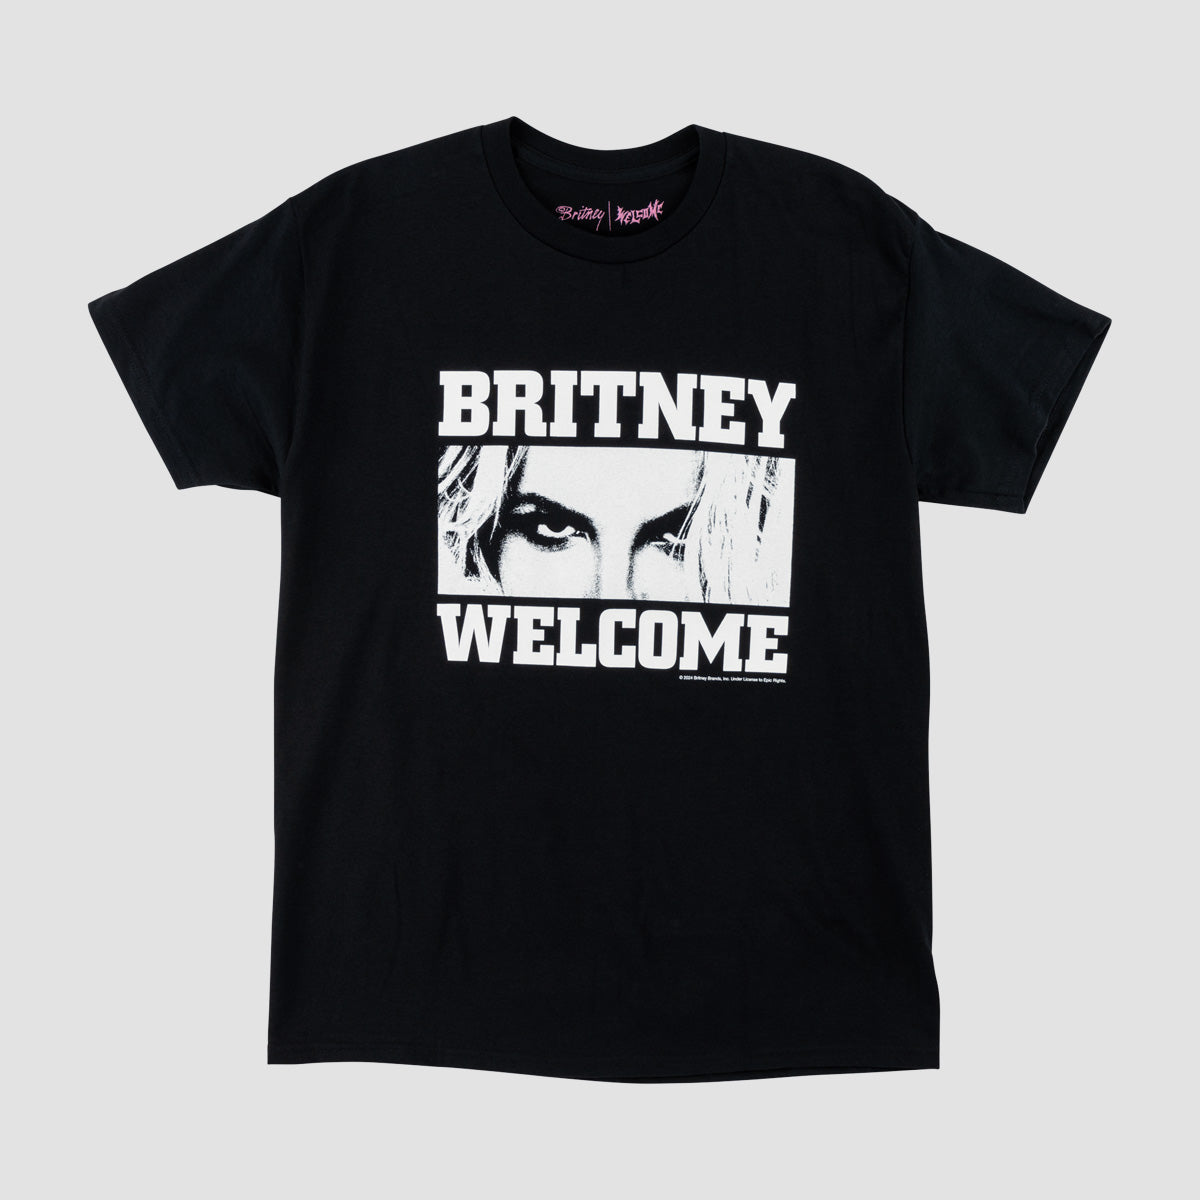 Welcome X Britney Sprears Till The World Ends T-Shirt Black